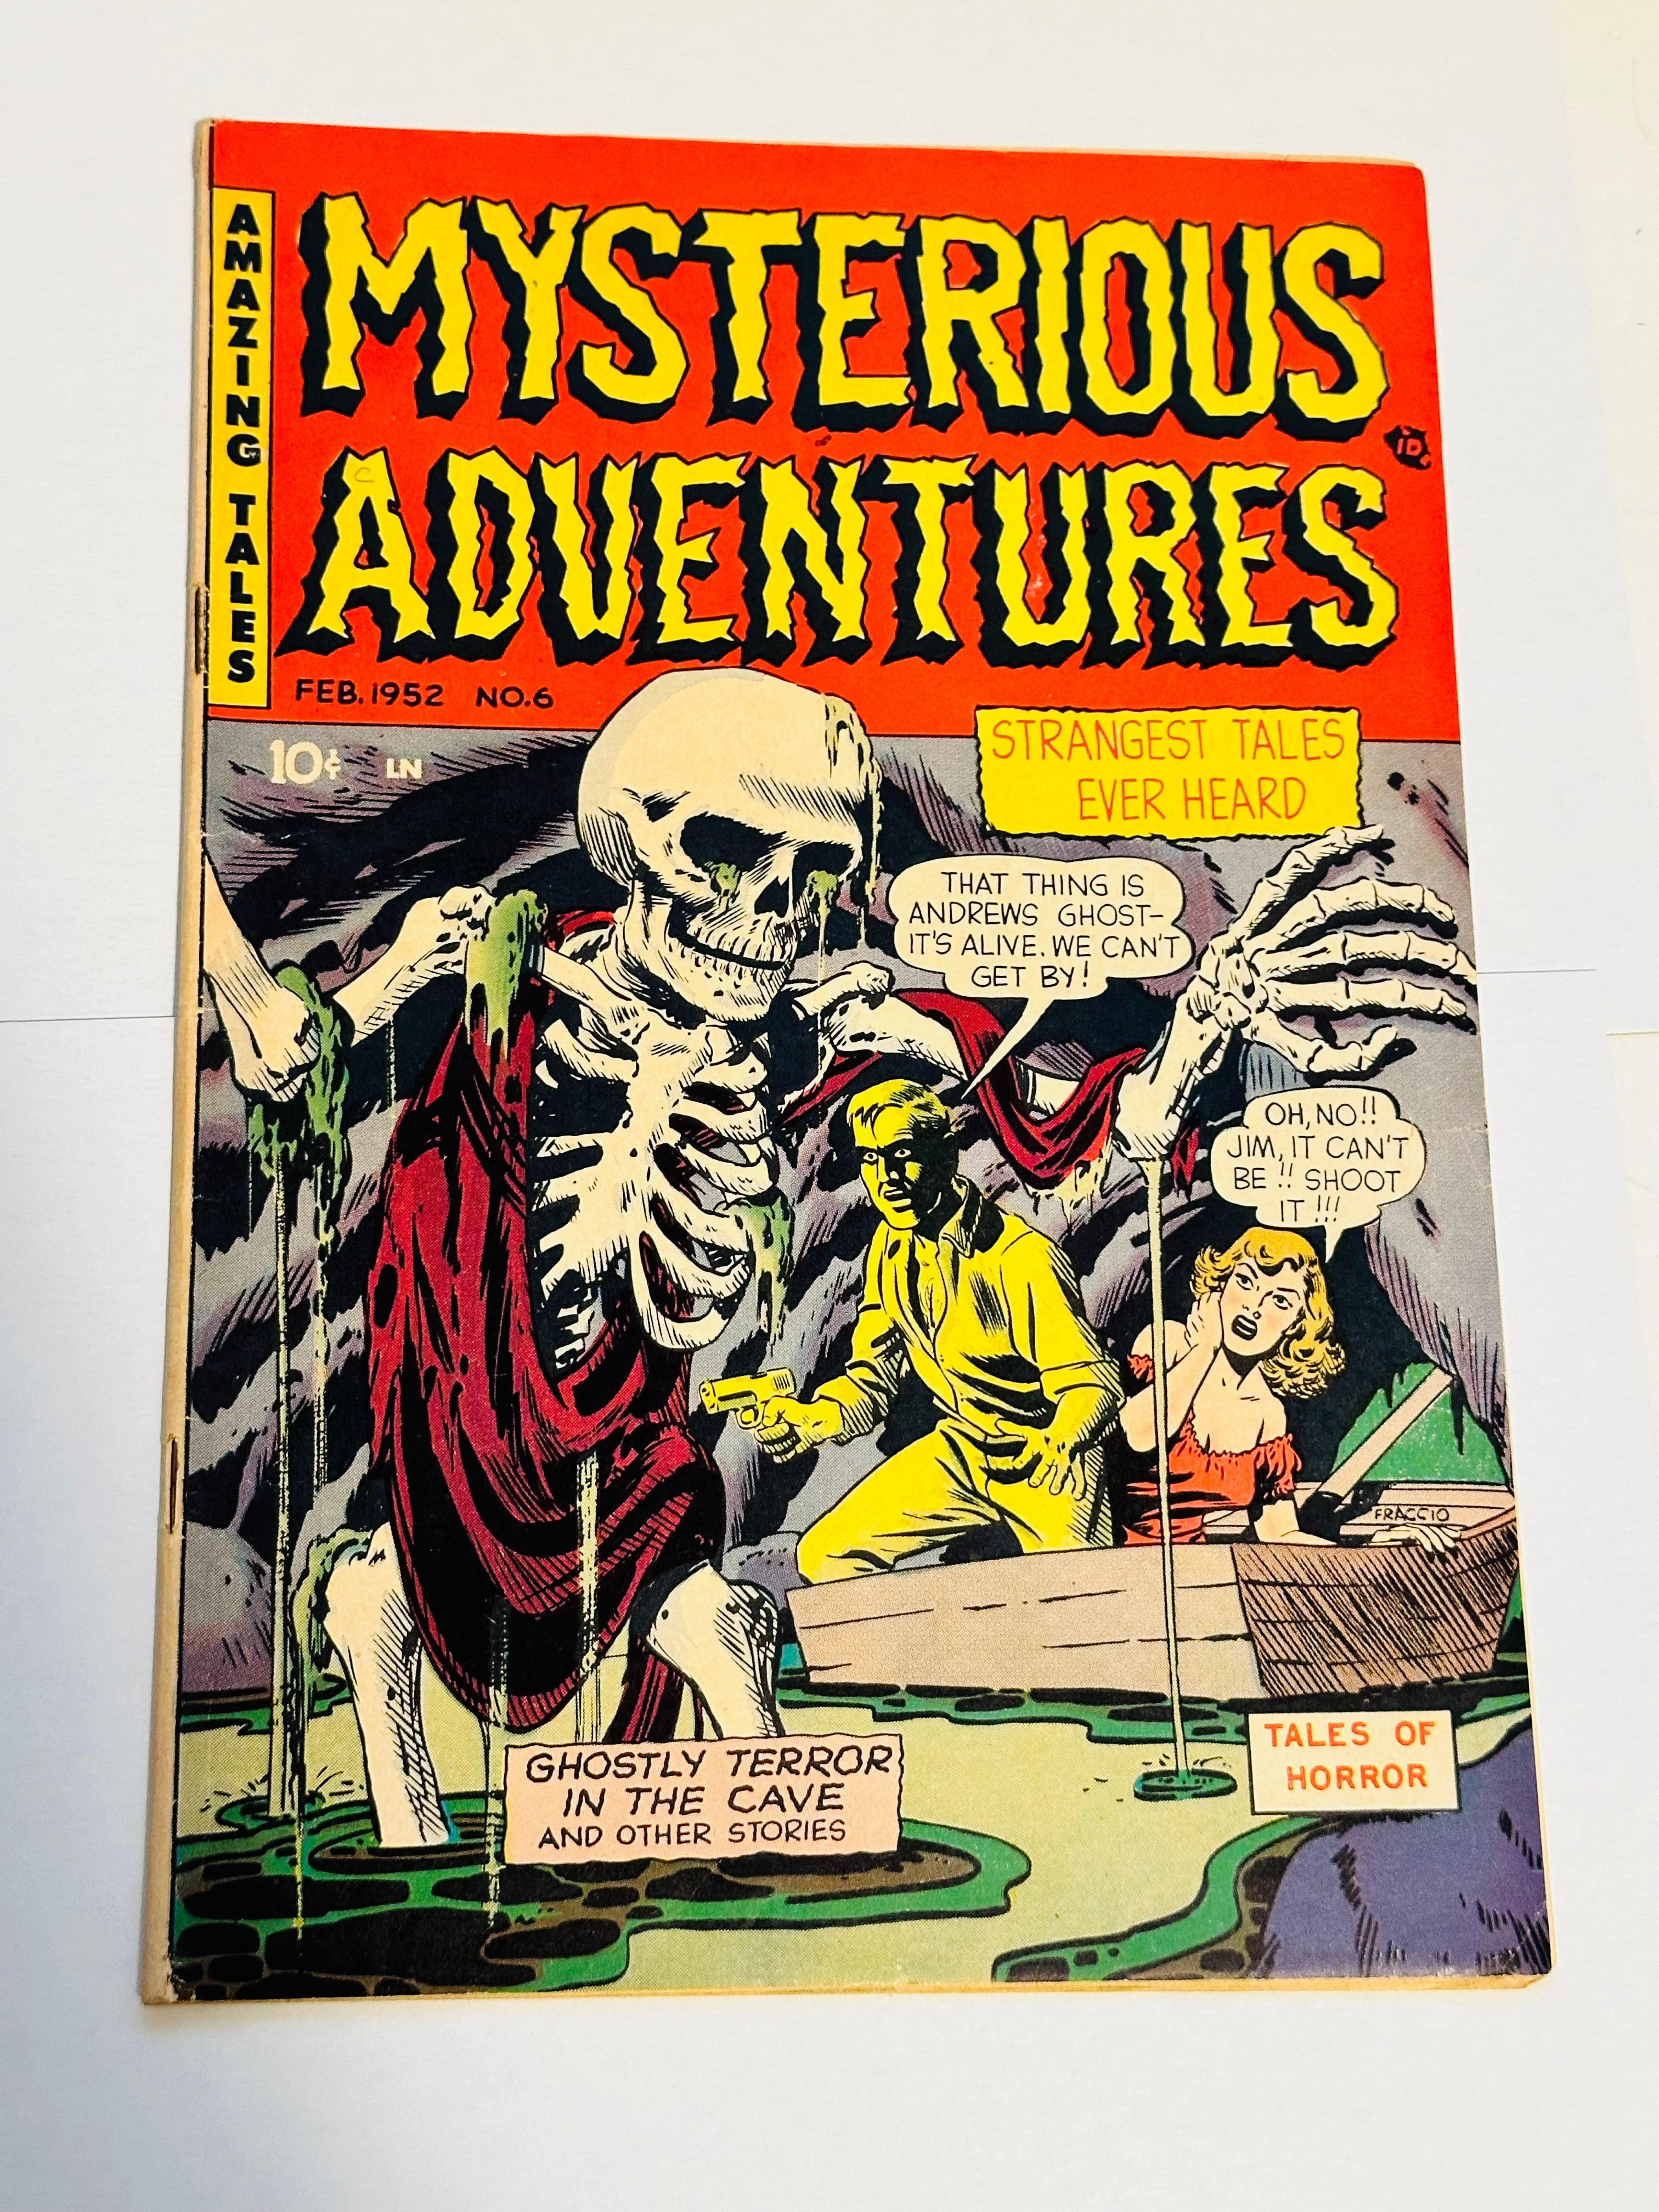 Mysterious adventures Horror comic book #6 from 1952